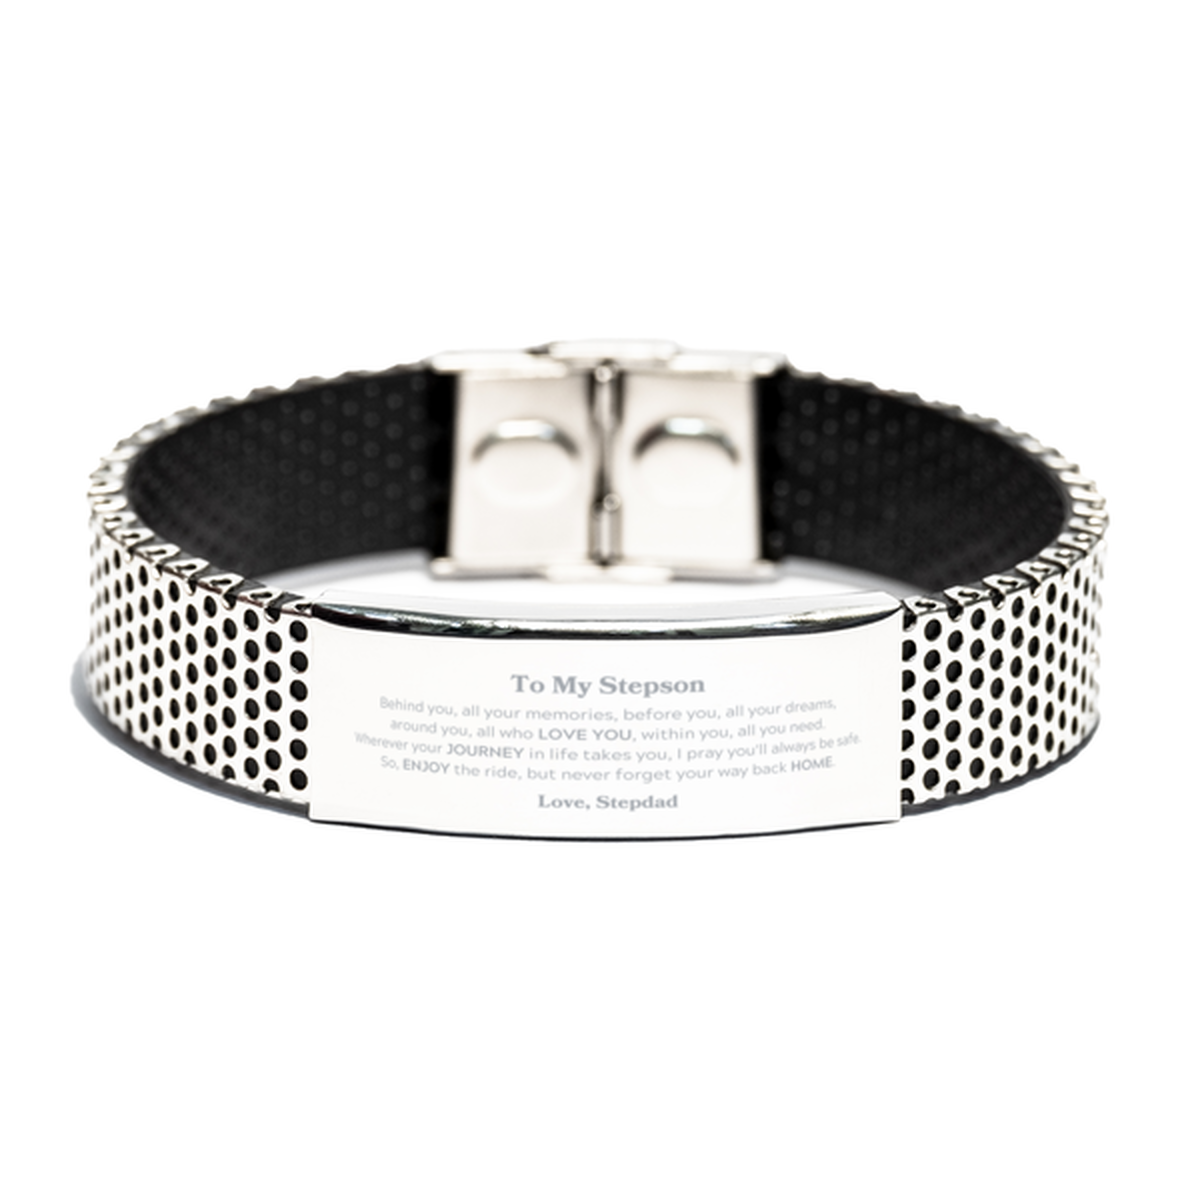 To My Stepson Graduation Gifts from Stepdad, Stepson Stainless Steel Bracelet Christmas Birthday Gifts for Stepson Behind you, all your memories, before you, all your dreams. Love, Stepdad